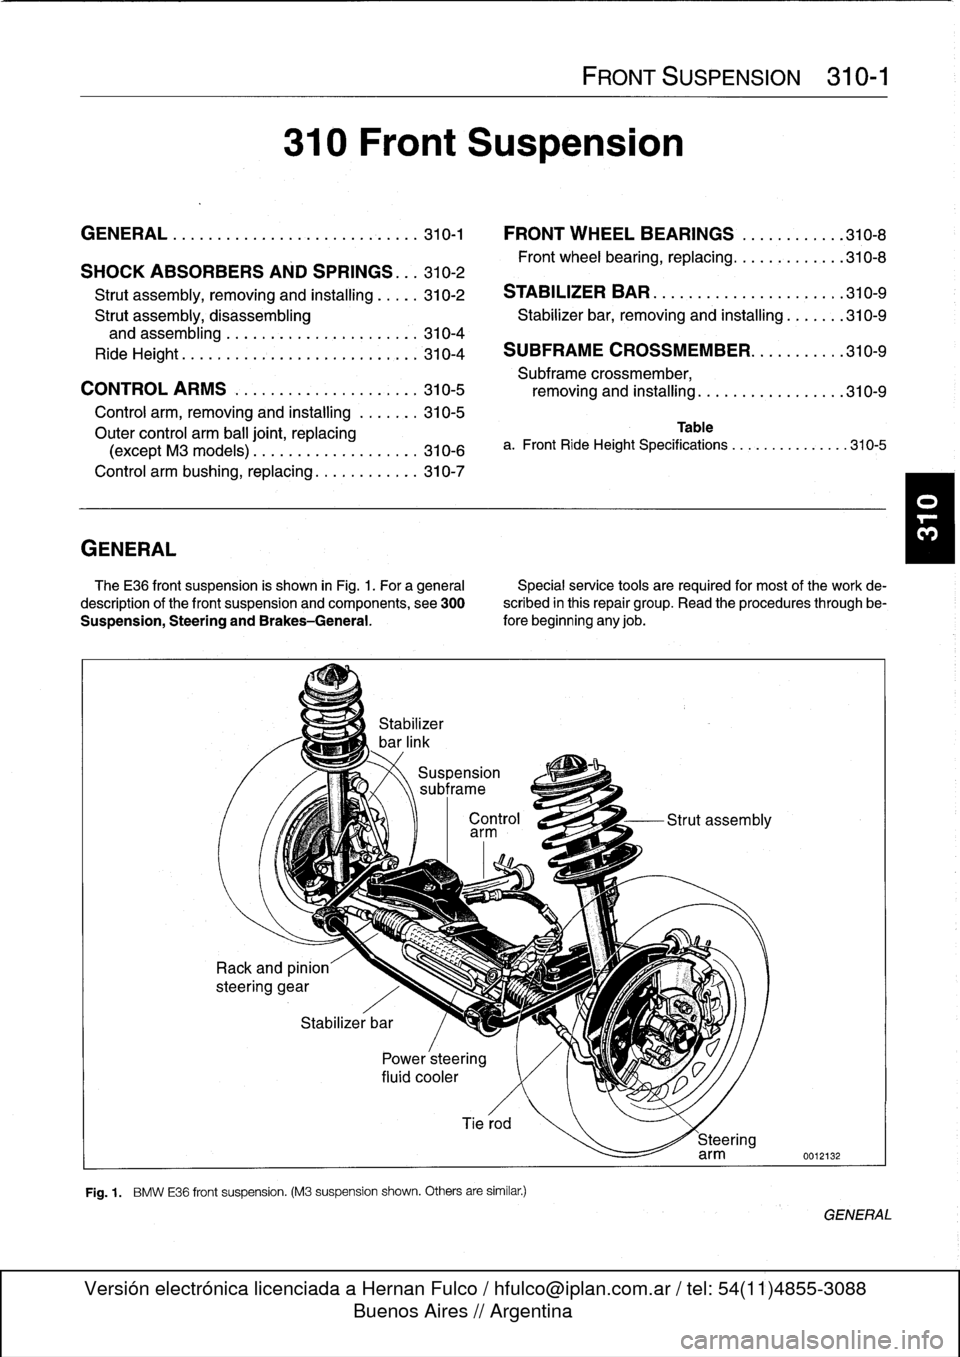 BMW 323i 1993 E36 Owners Manual 
GENERAL

310
Front
Suspension

GENERAL
..
.
.
.
.
.
.
.
.
.
.......
.
........
.
310-1

	

FRONT
WHEEL
BEARINGS
..
.
.
.
.......
310-8

SHOCK
ABSORBERS
AND
SPRINGS
..
.
310-2

	

Front
wheel
bearing,